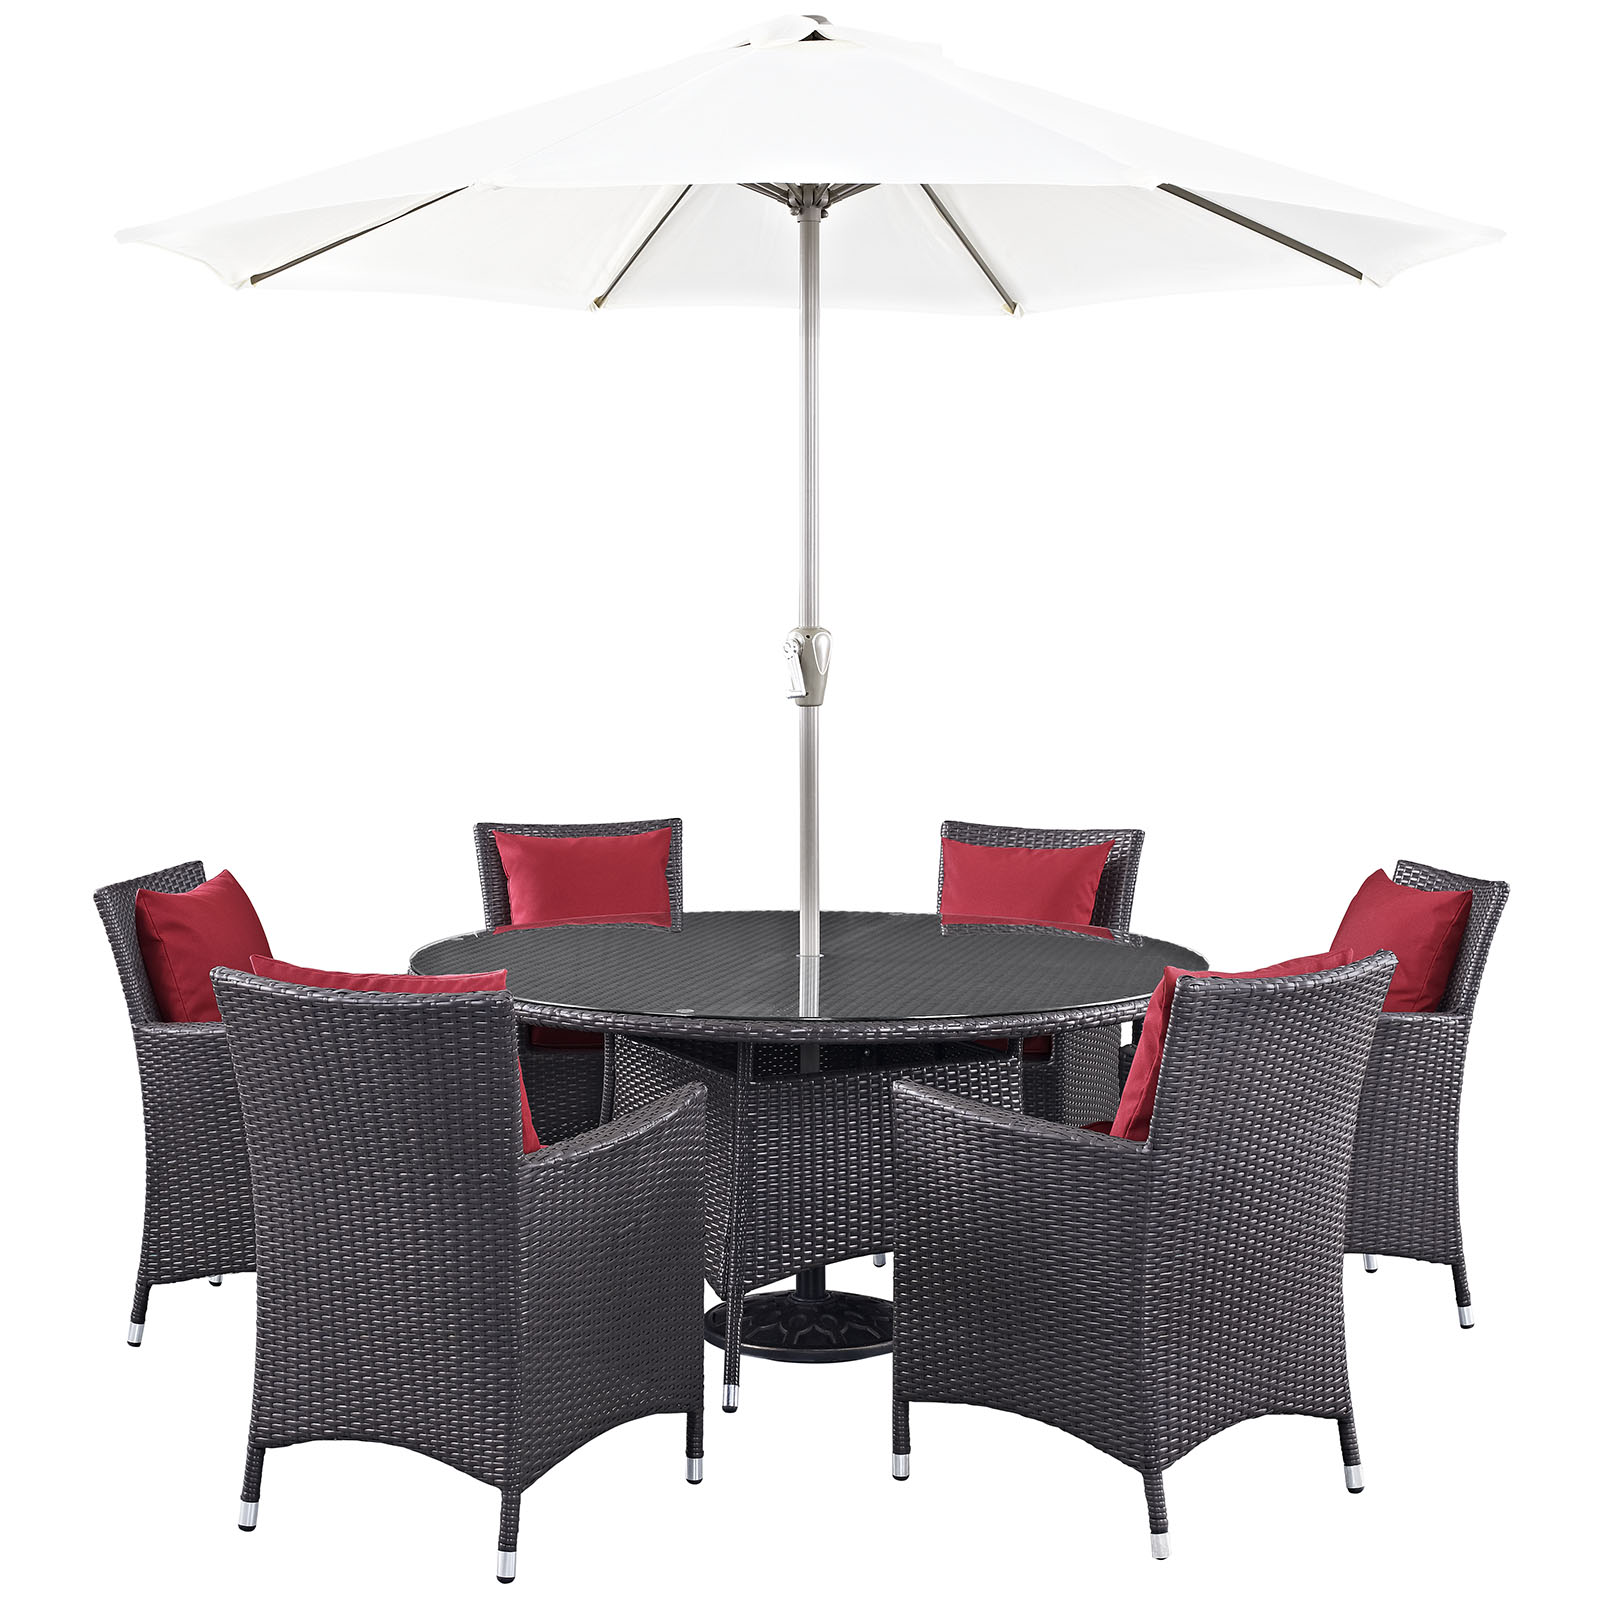 Modway Convene 8 Piece Outdoor Patio Dining Set in Espresso Red - image 2 of 6